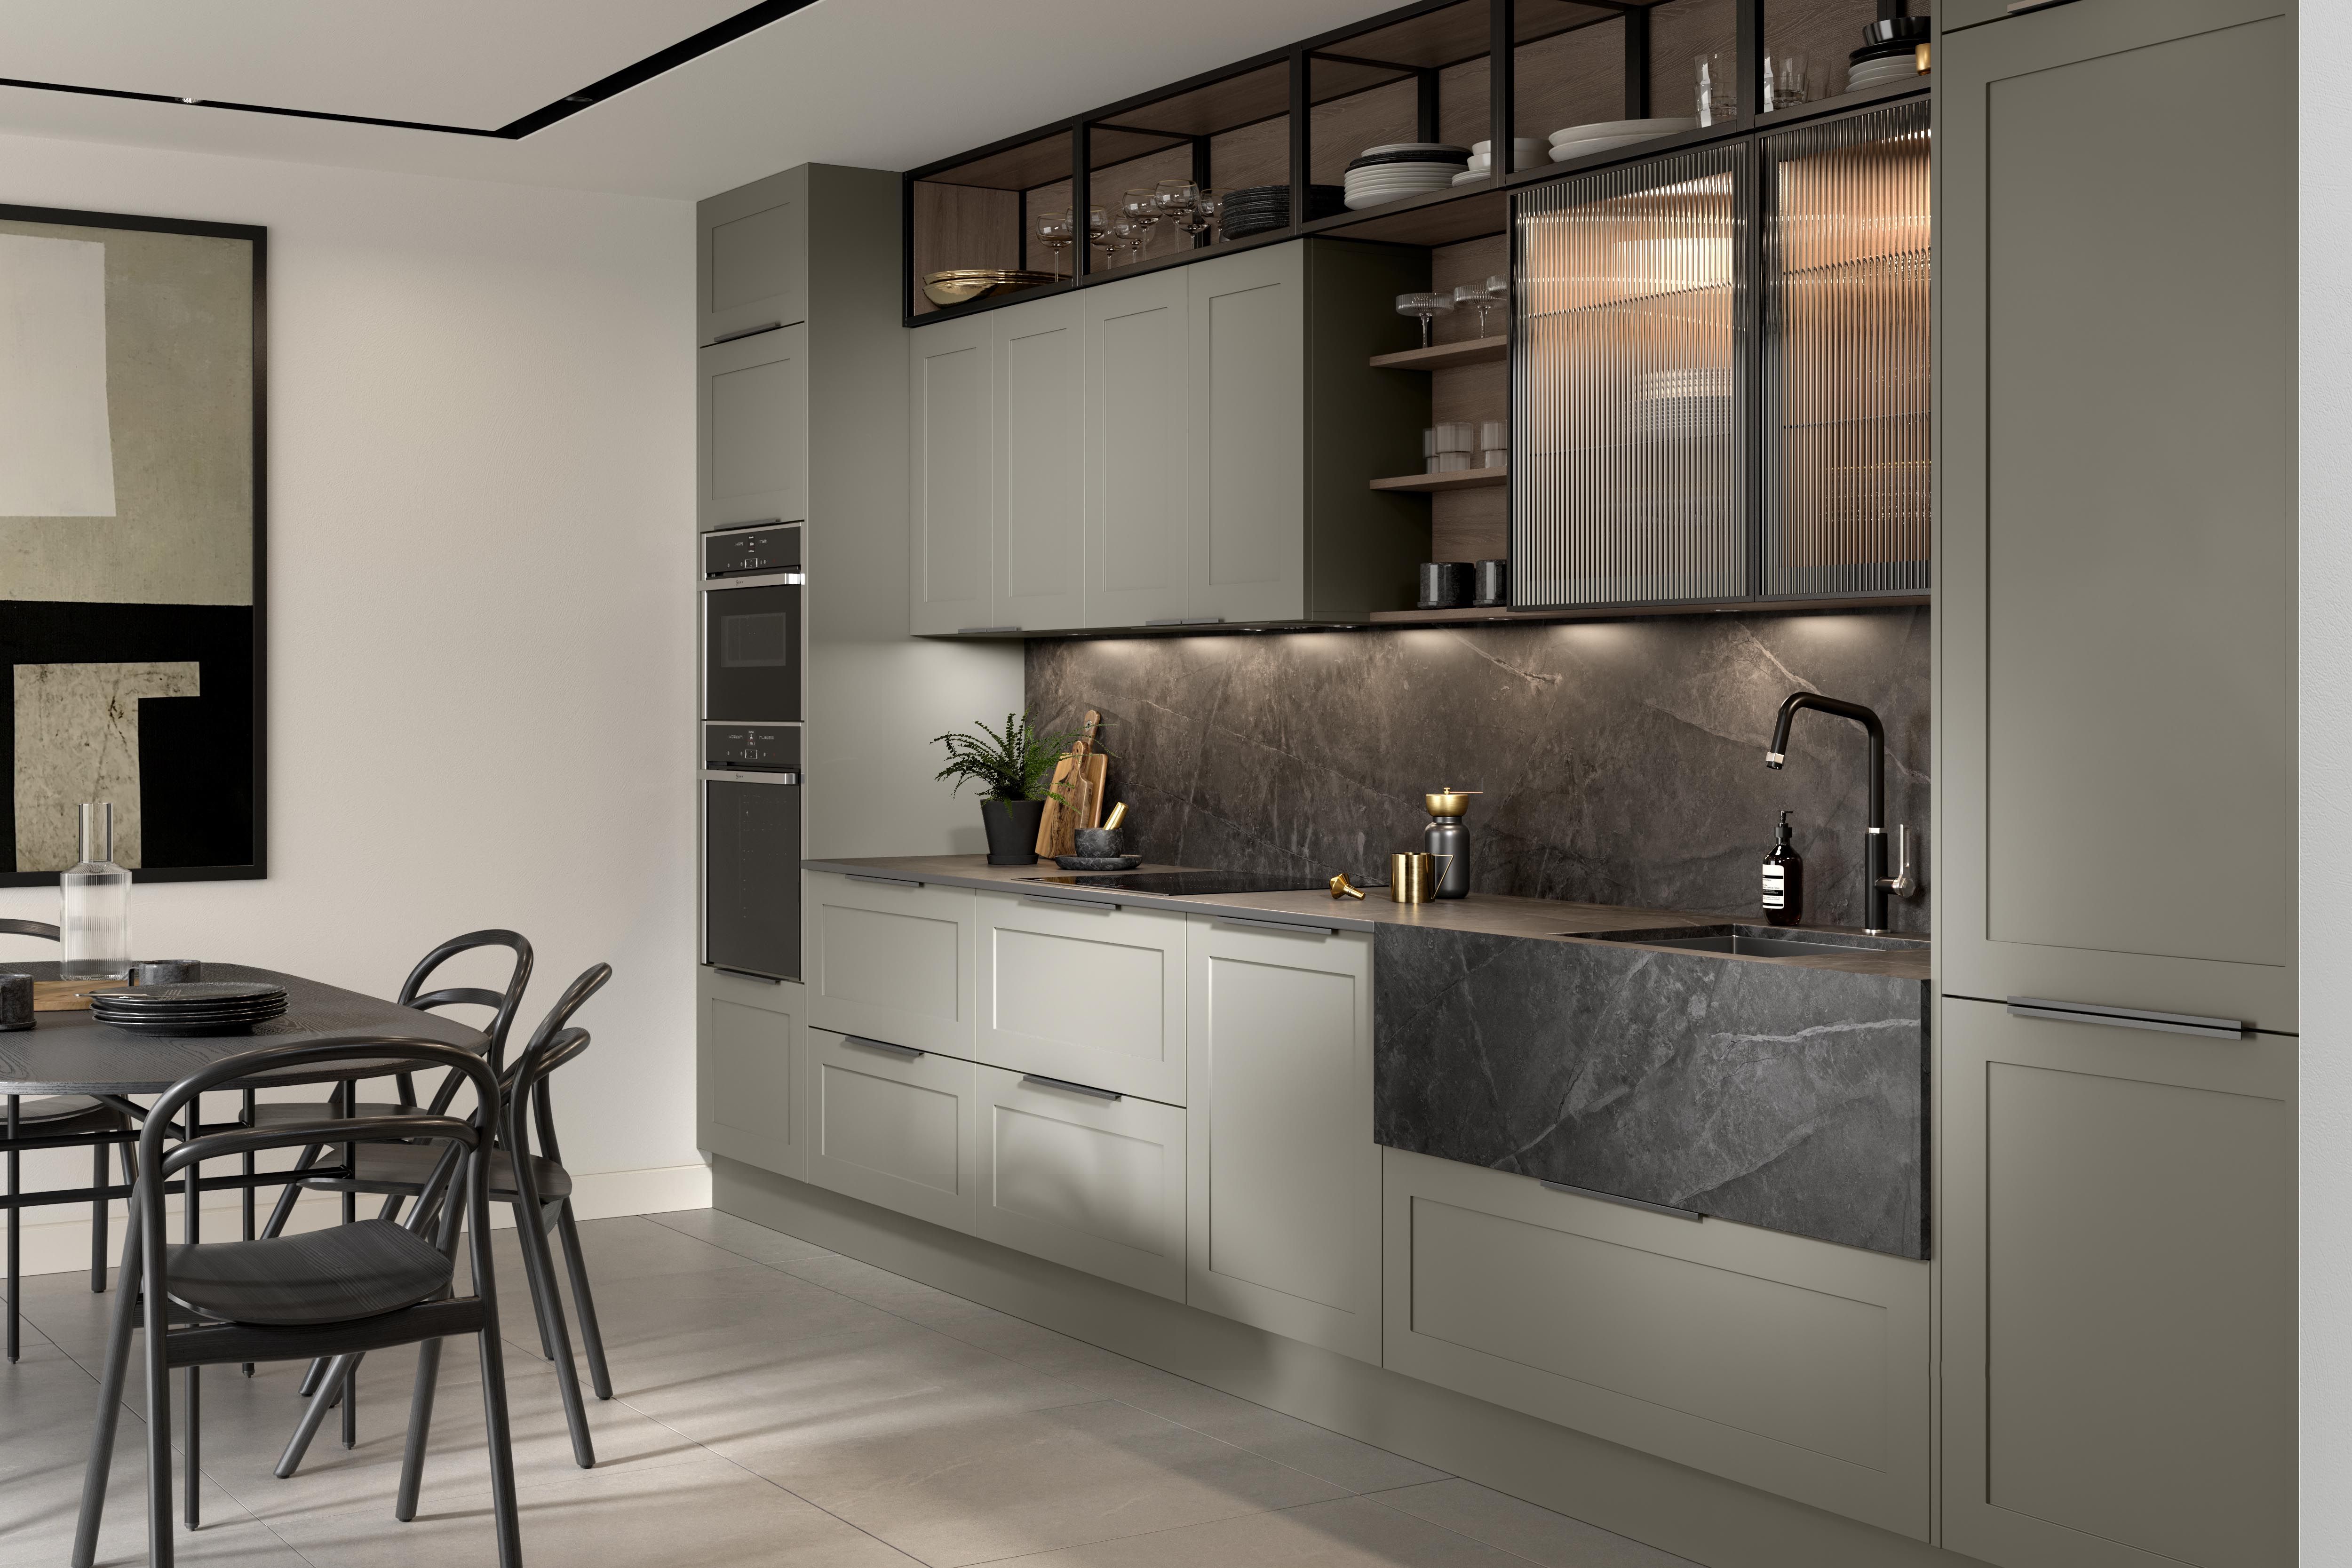 CGI of a grey apartment kitchen diner area